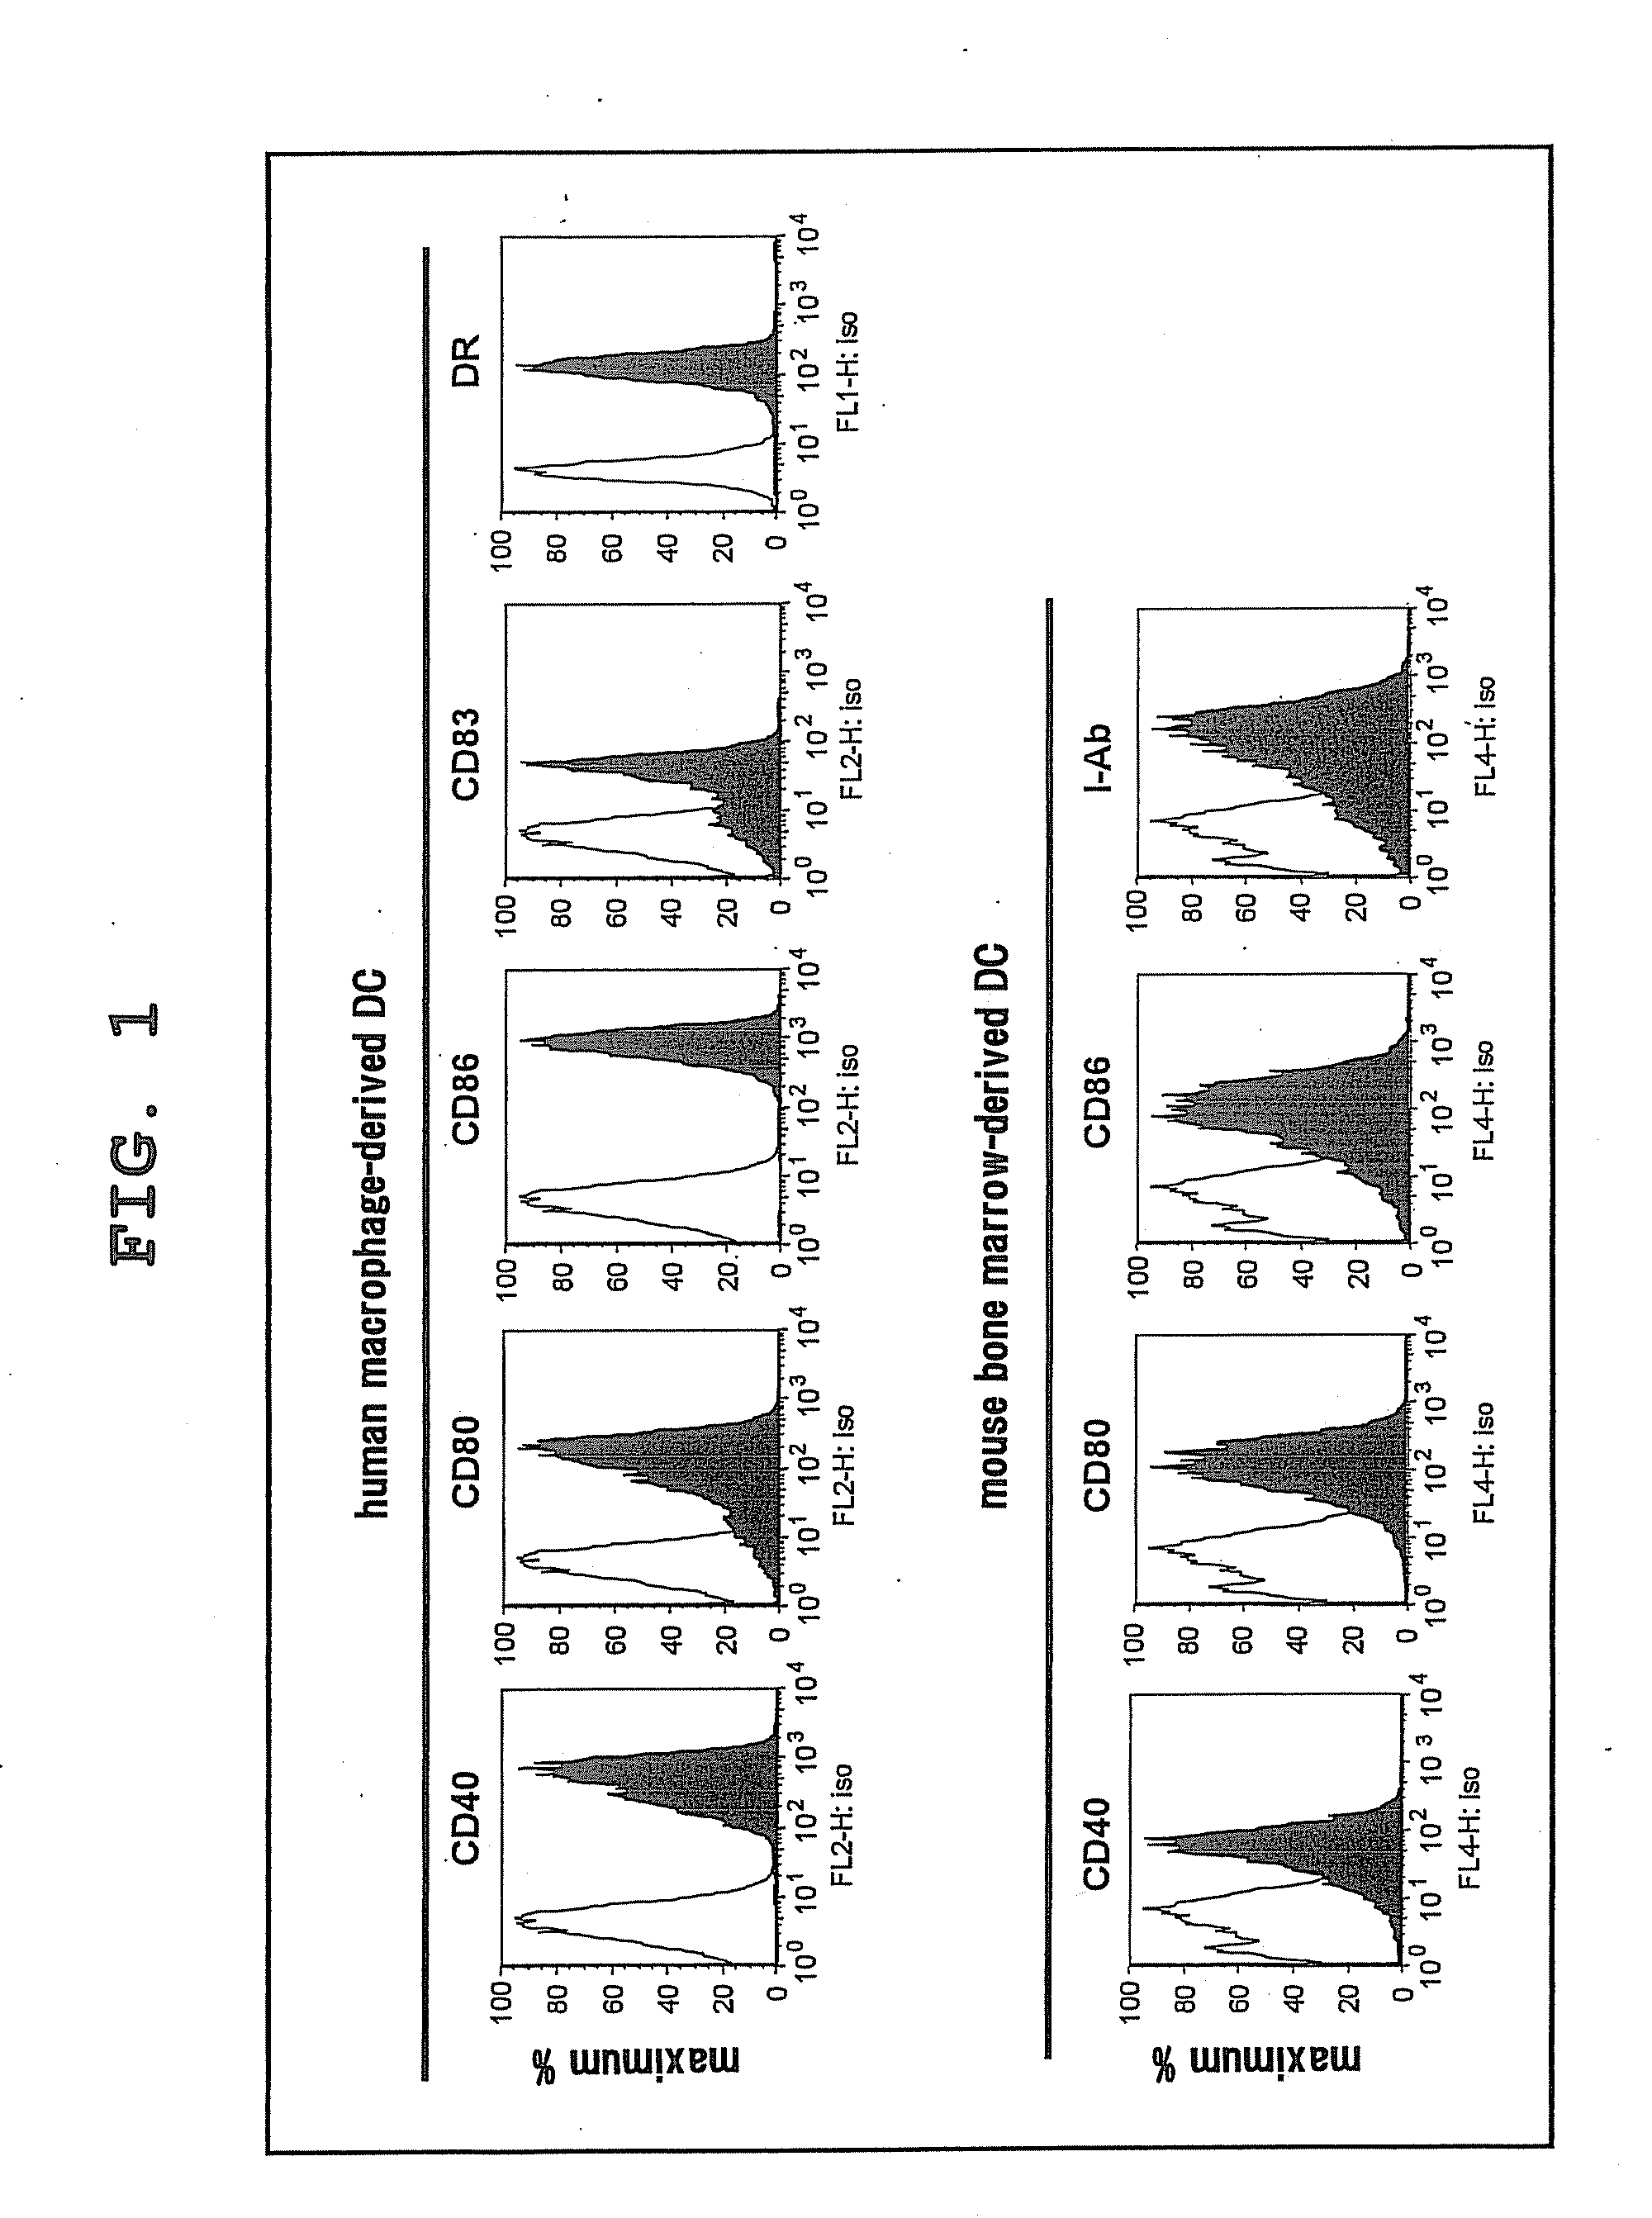 Method for analysis of nkt cell function